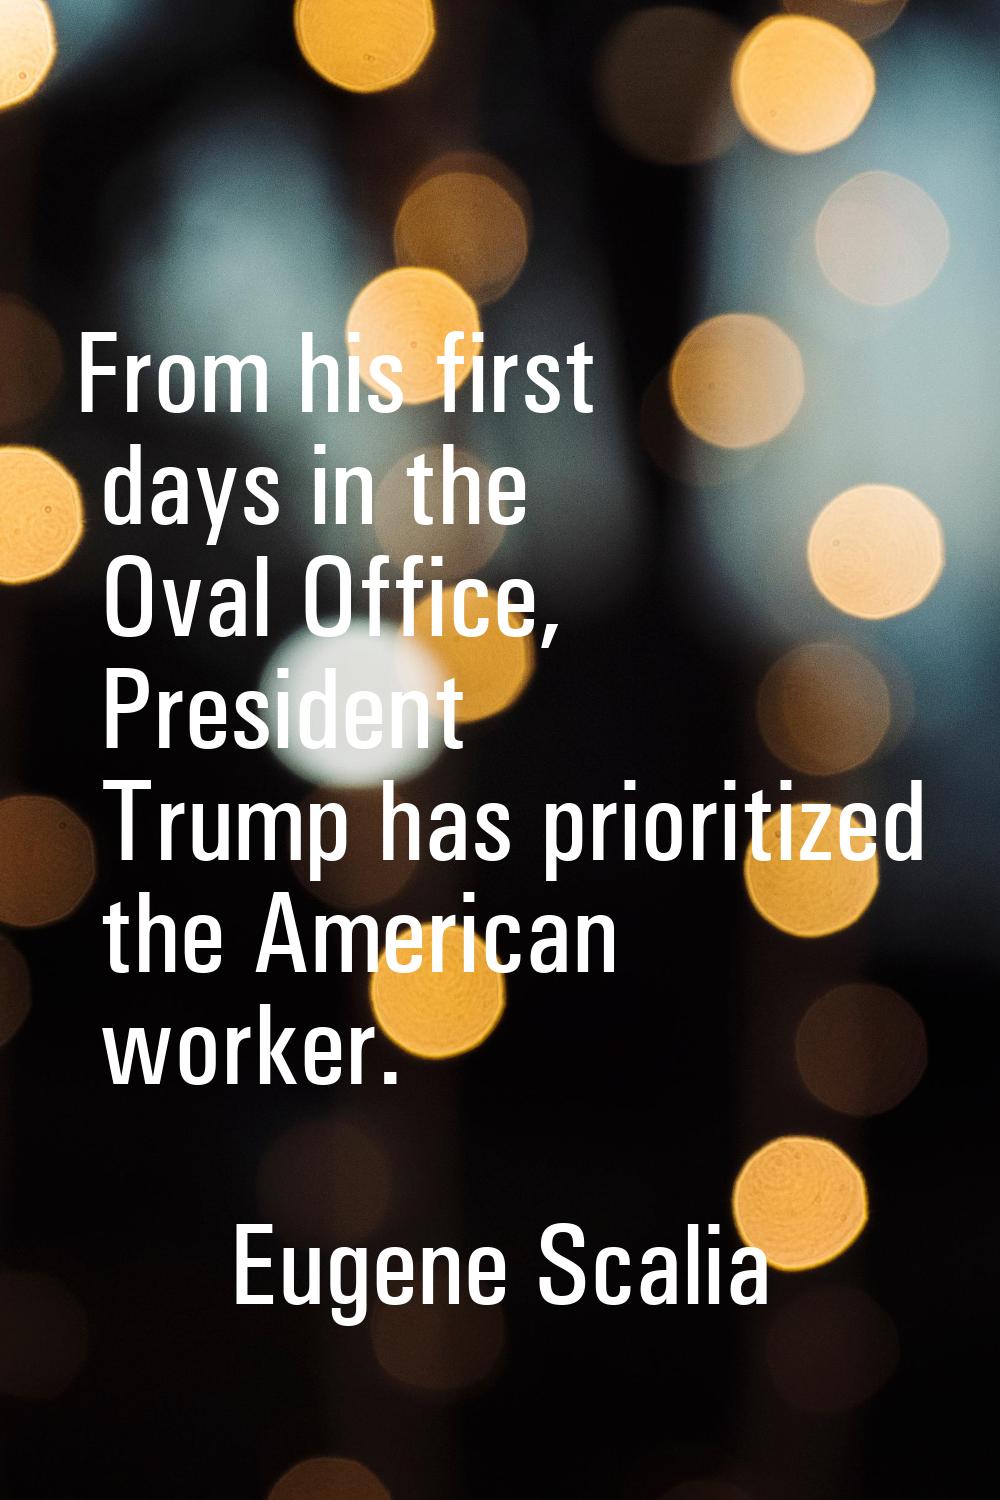 From his first days in the Oval Office, President Trump has prioritized the American worker.